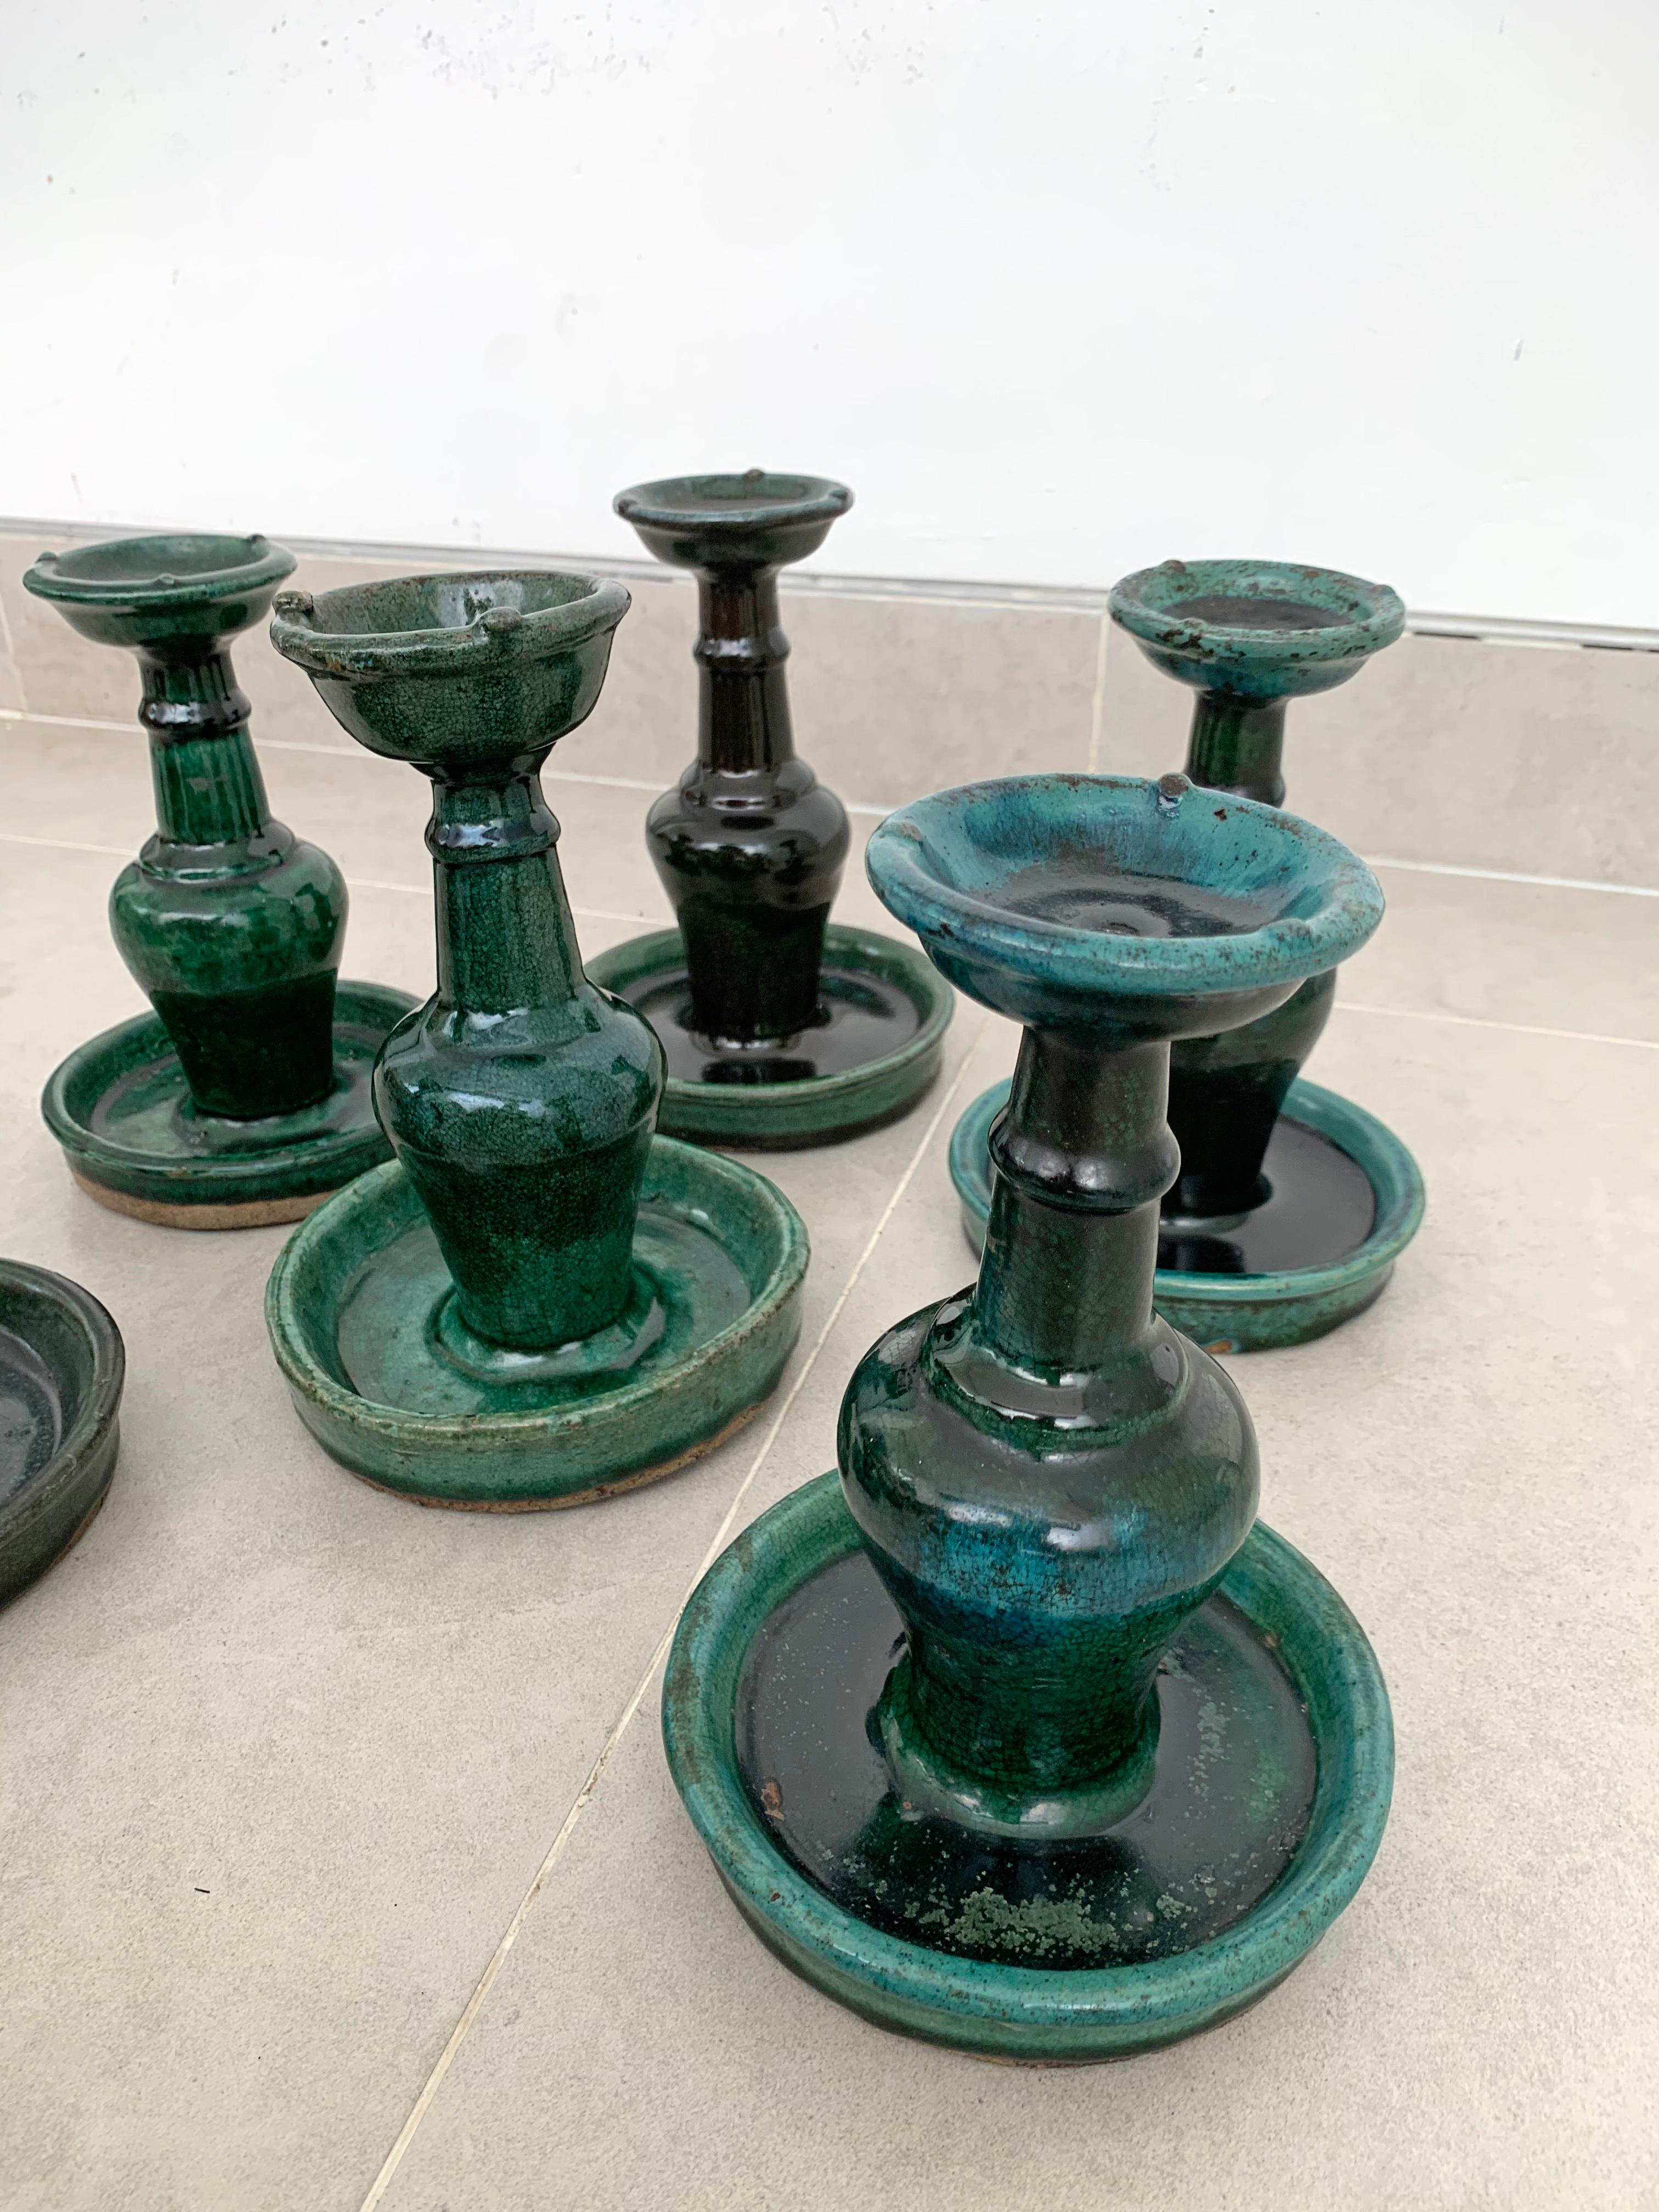 Chinese 'Shiwan' Candleholder / Oil Lamp Set of 6, Green-Glazed, c. 1900 For Sale 2